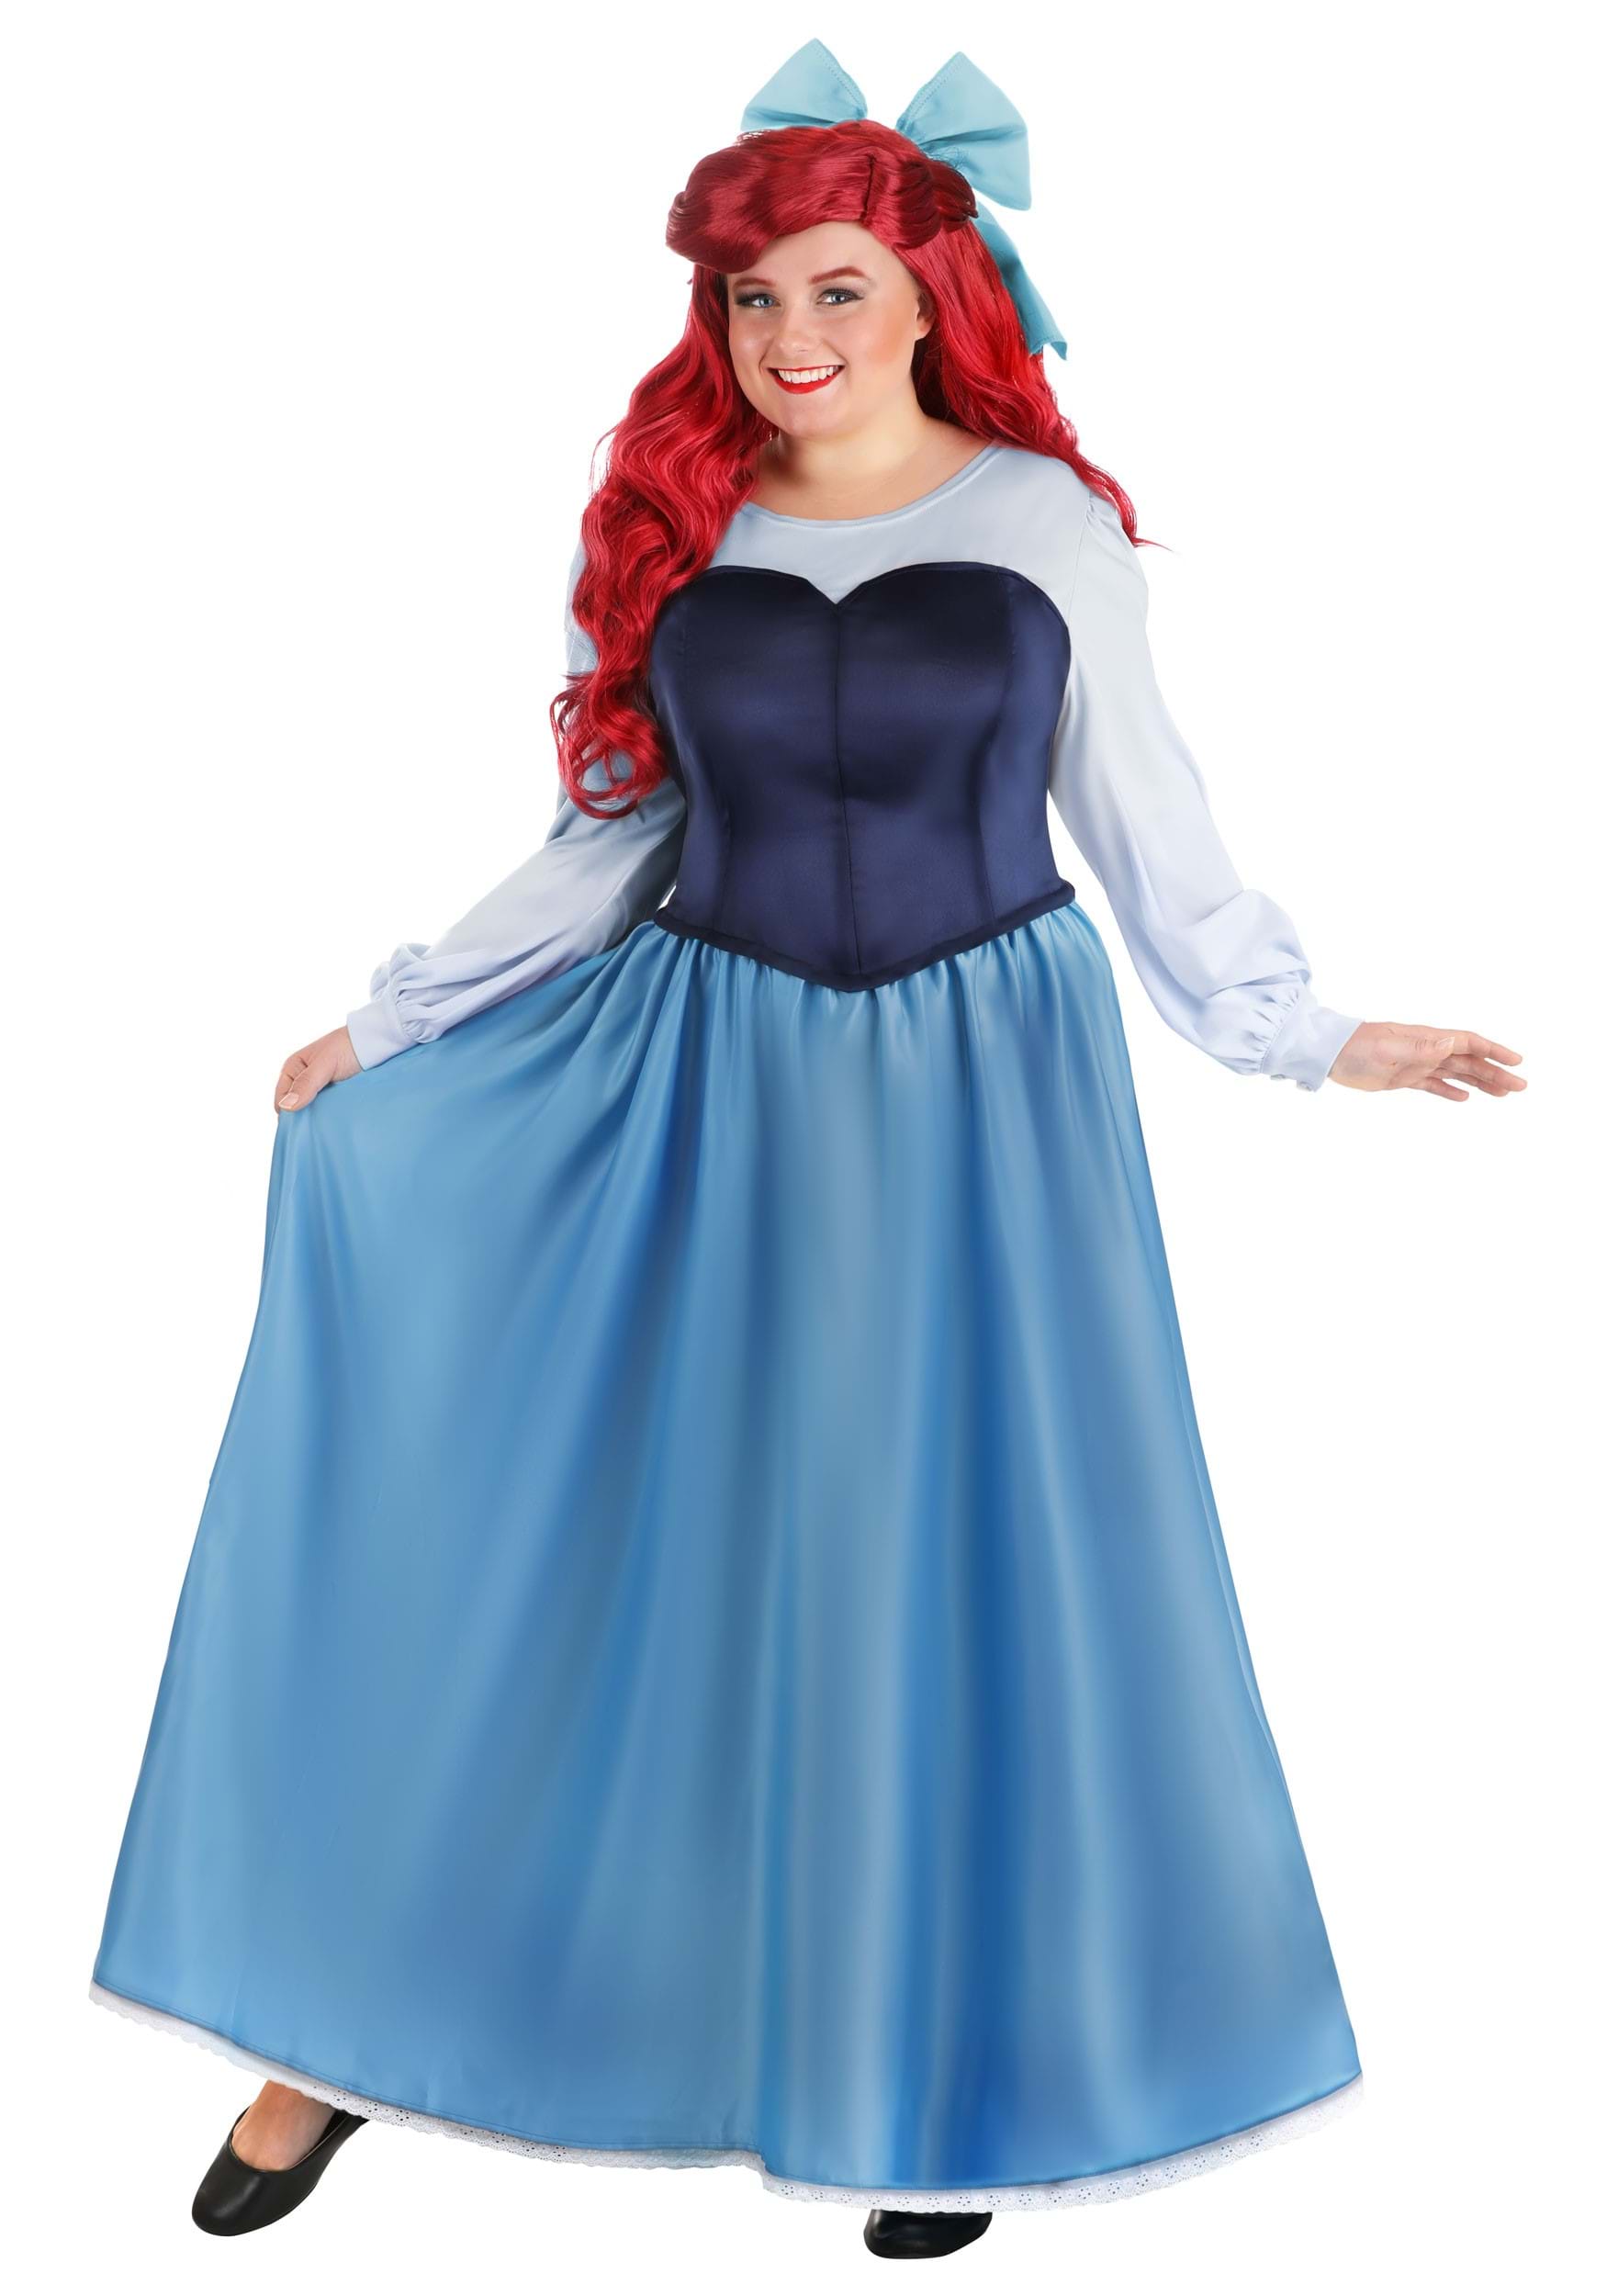 First Look at the Royal Wedding Dress – Ariel's, That Is | Disney Parks Blog